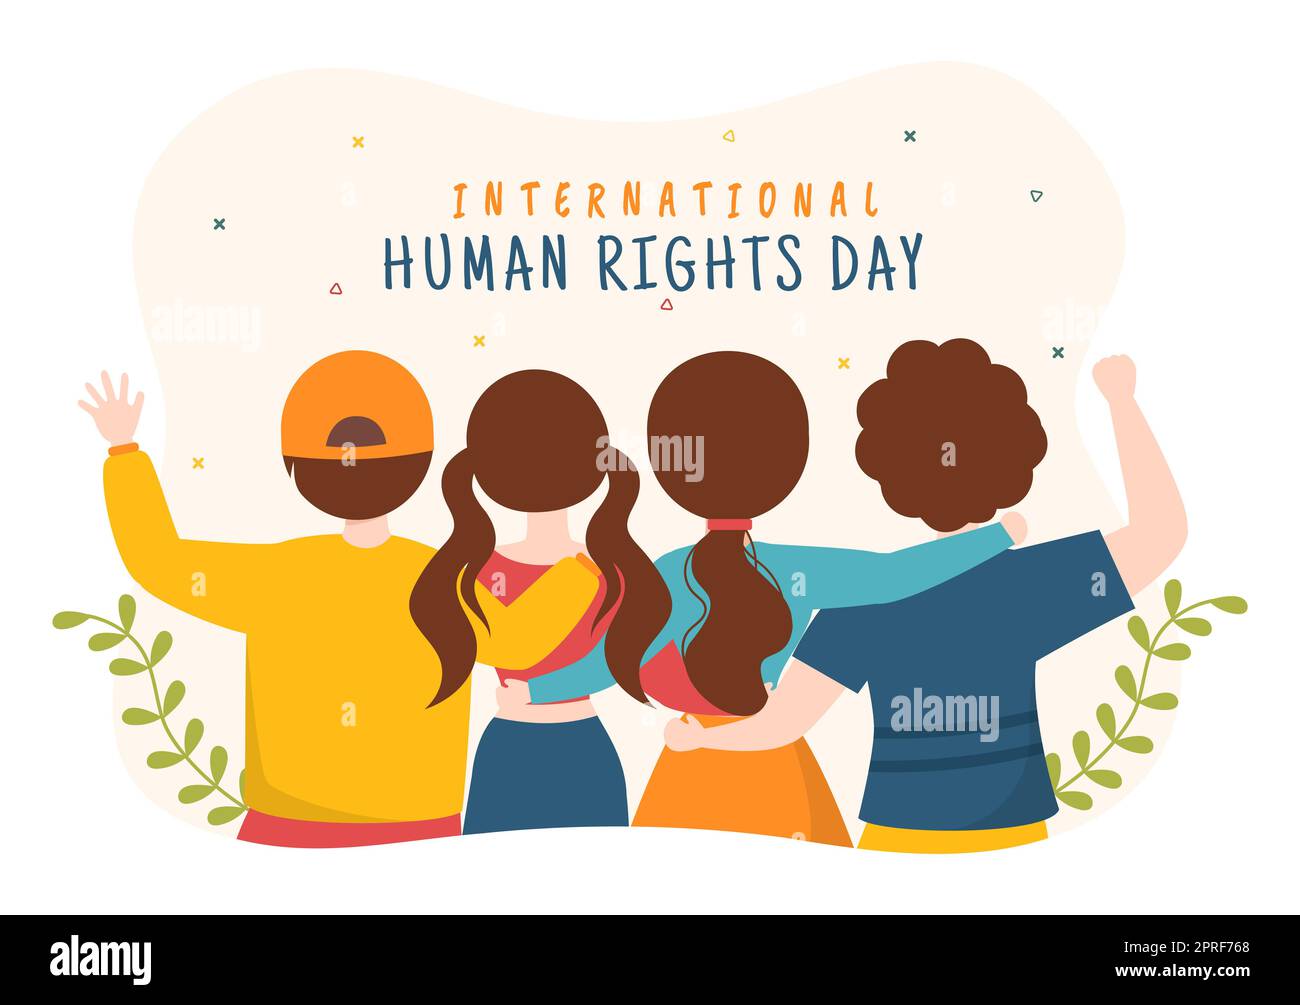 human rights day template hand drawn flat cartoon illustration with hands raised breaking chains or holding hand design 2PRF768